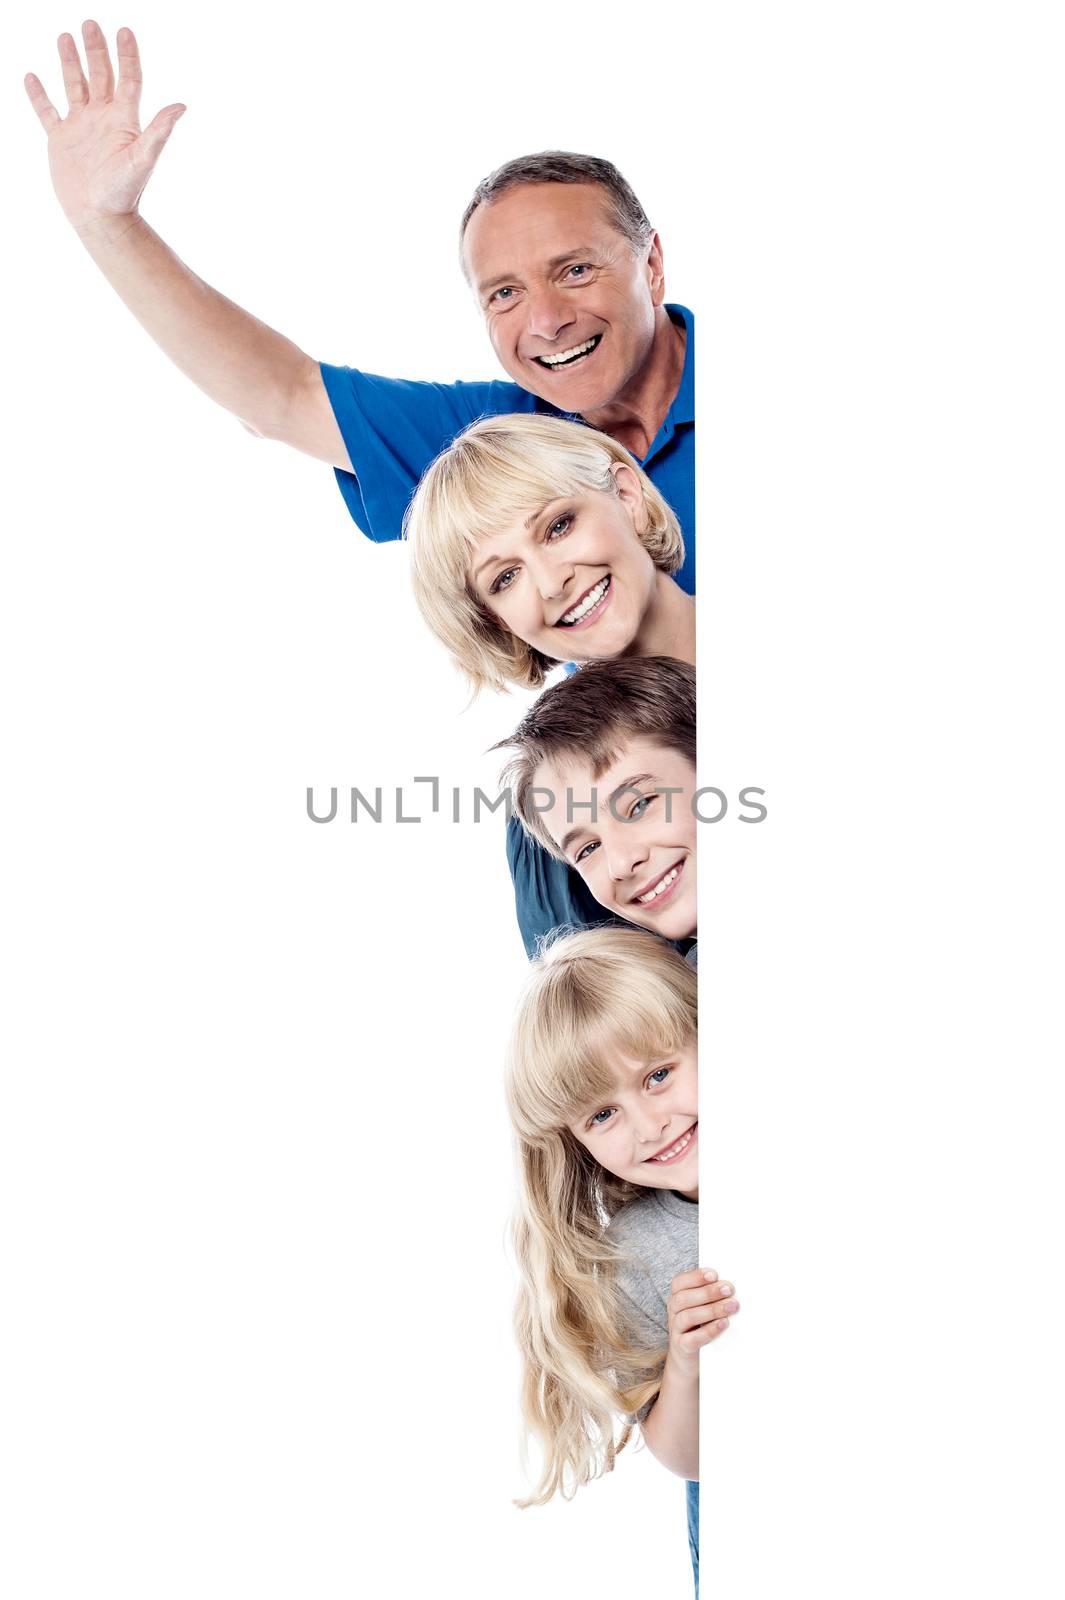 Smiling father raising his arm, family posing together